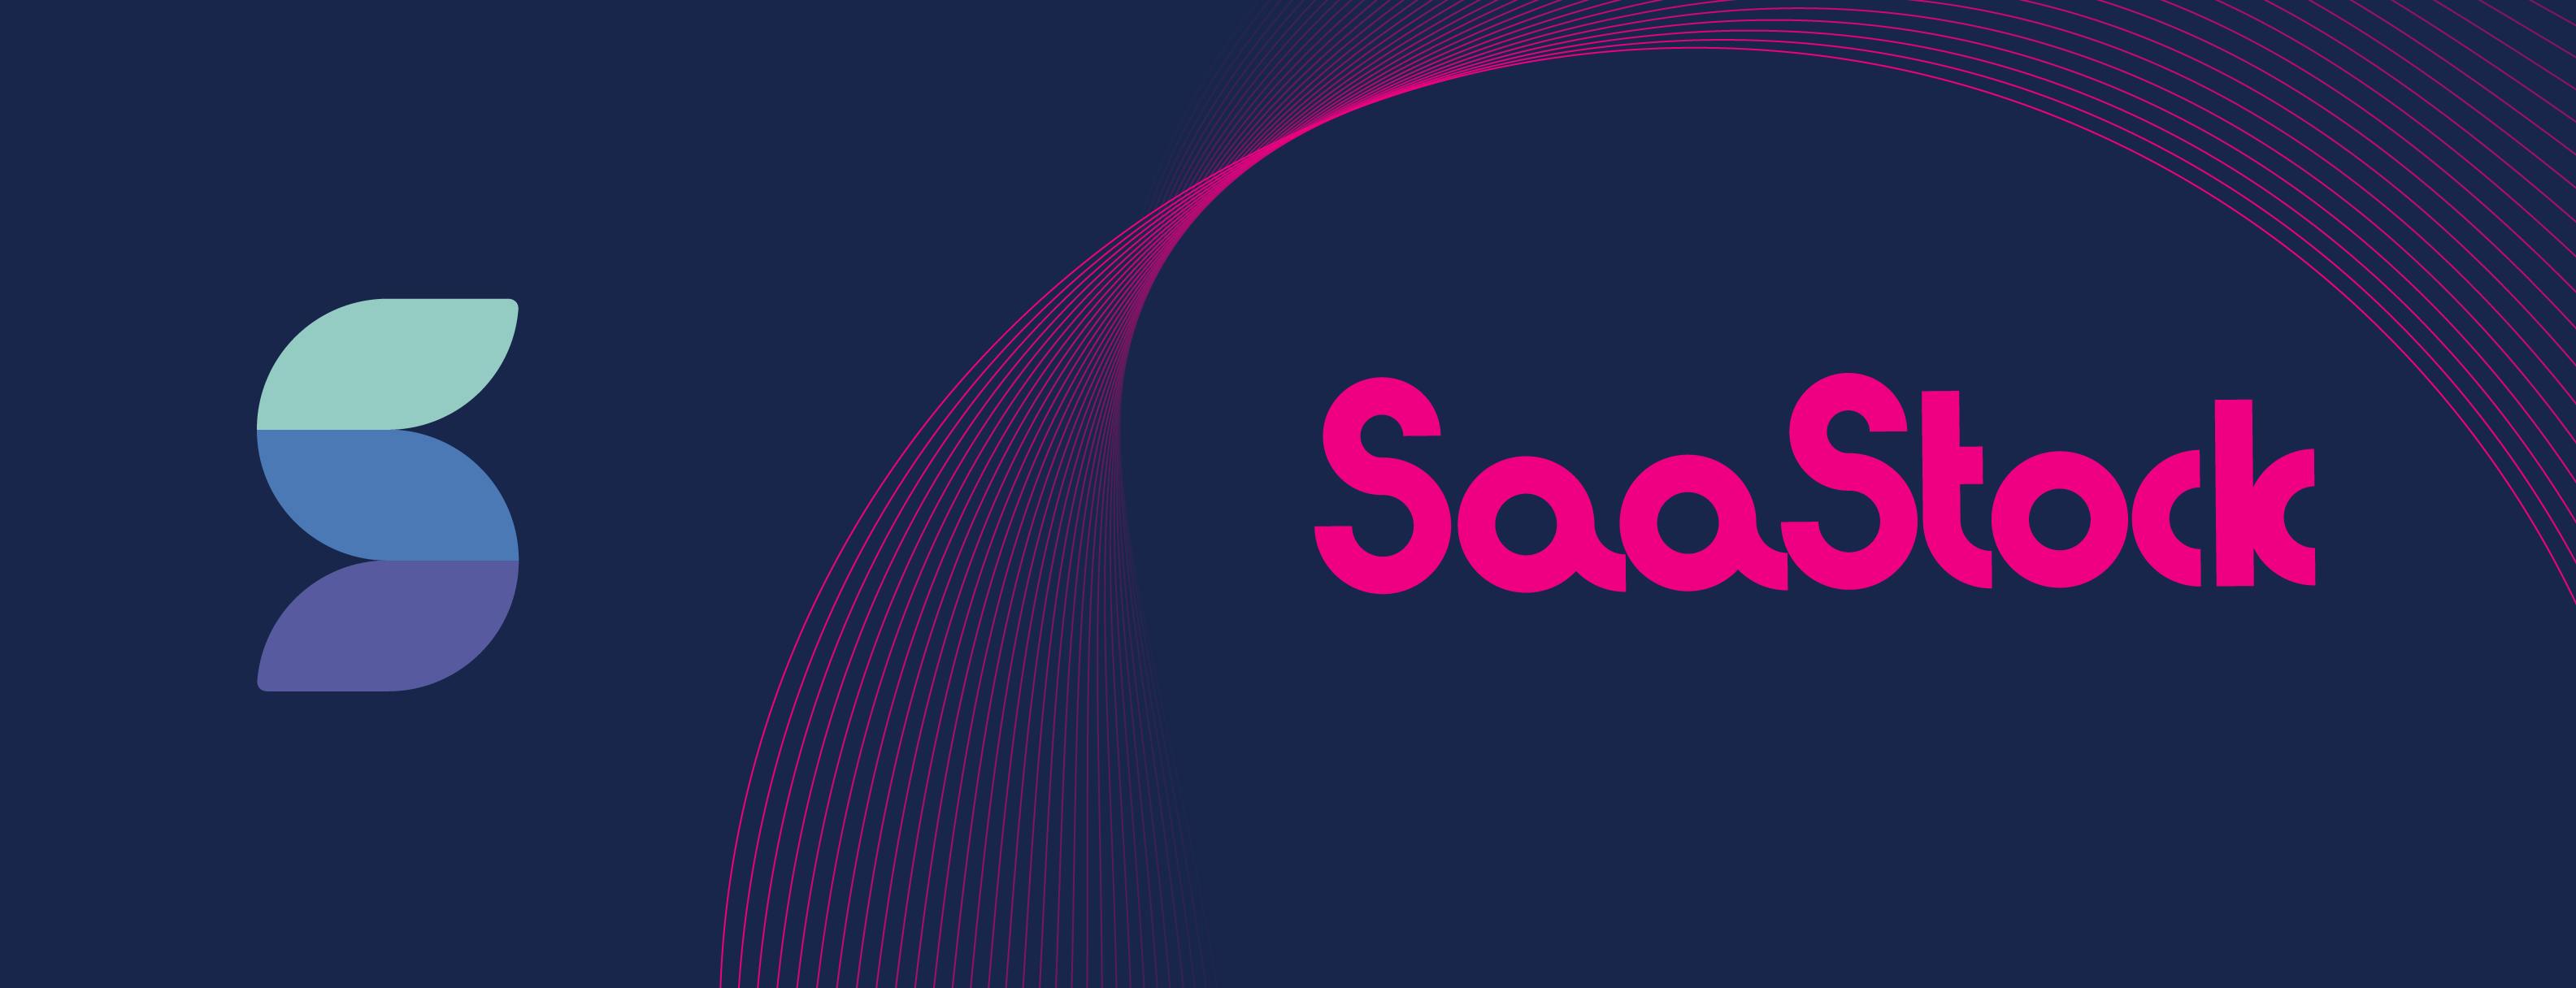 SaaStock 2022: Meet Our Team at Europe’s Can’t-Miss SaaS Conference